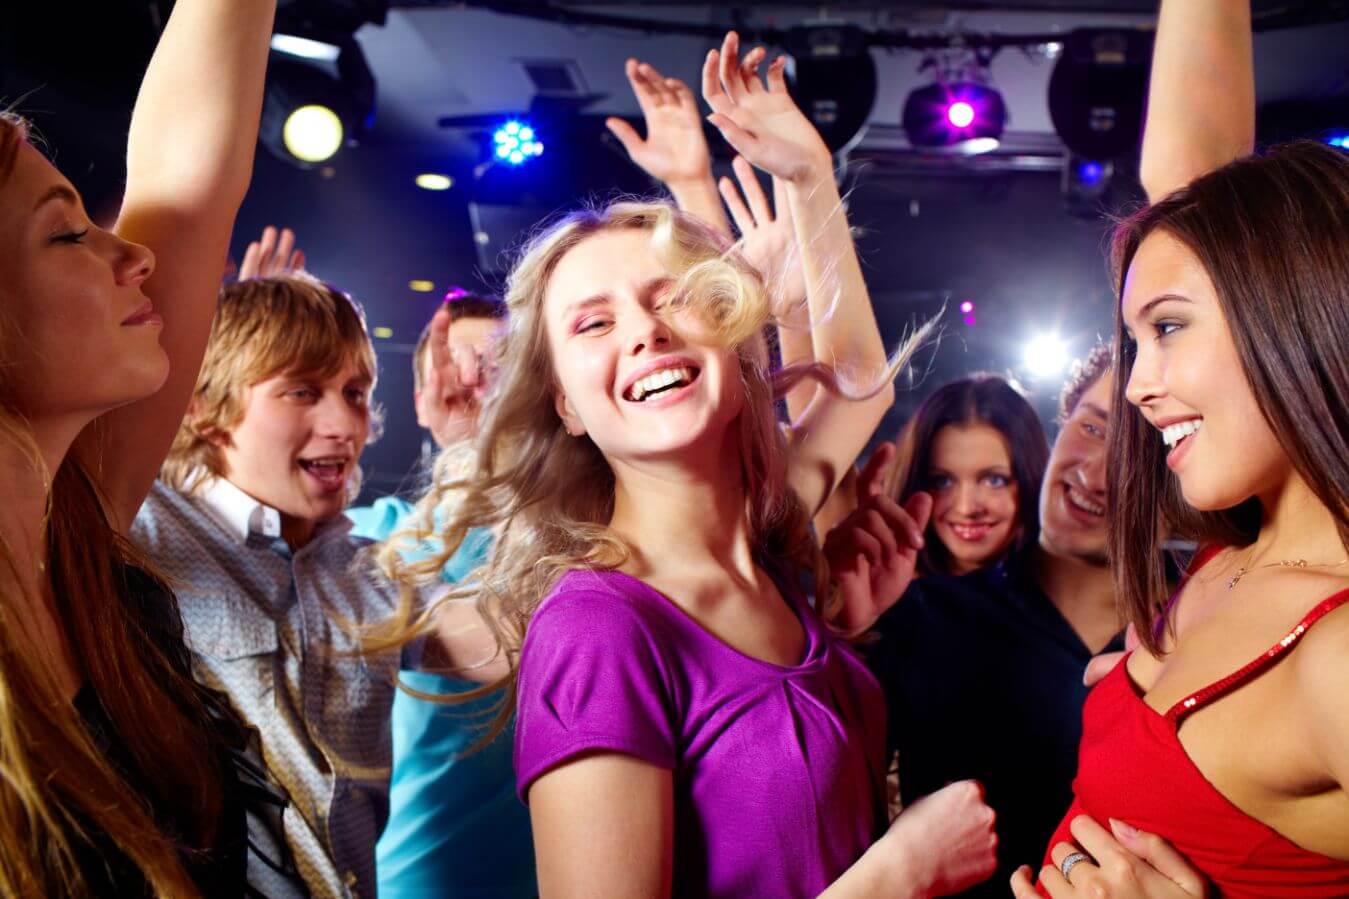 A group of young people enjoying themselves on the dance floor at a nightclub in Chicago.